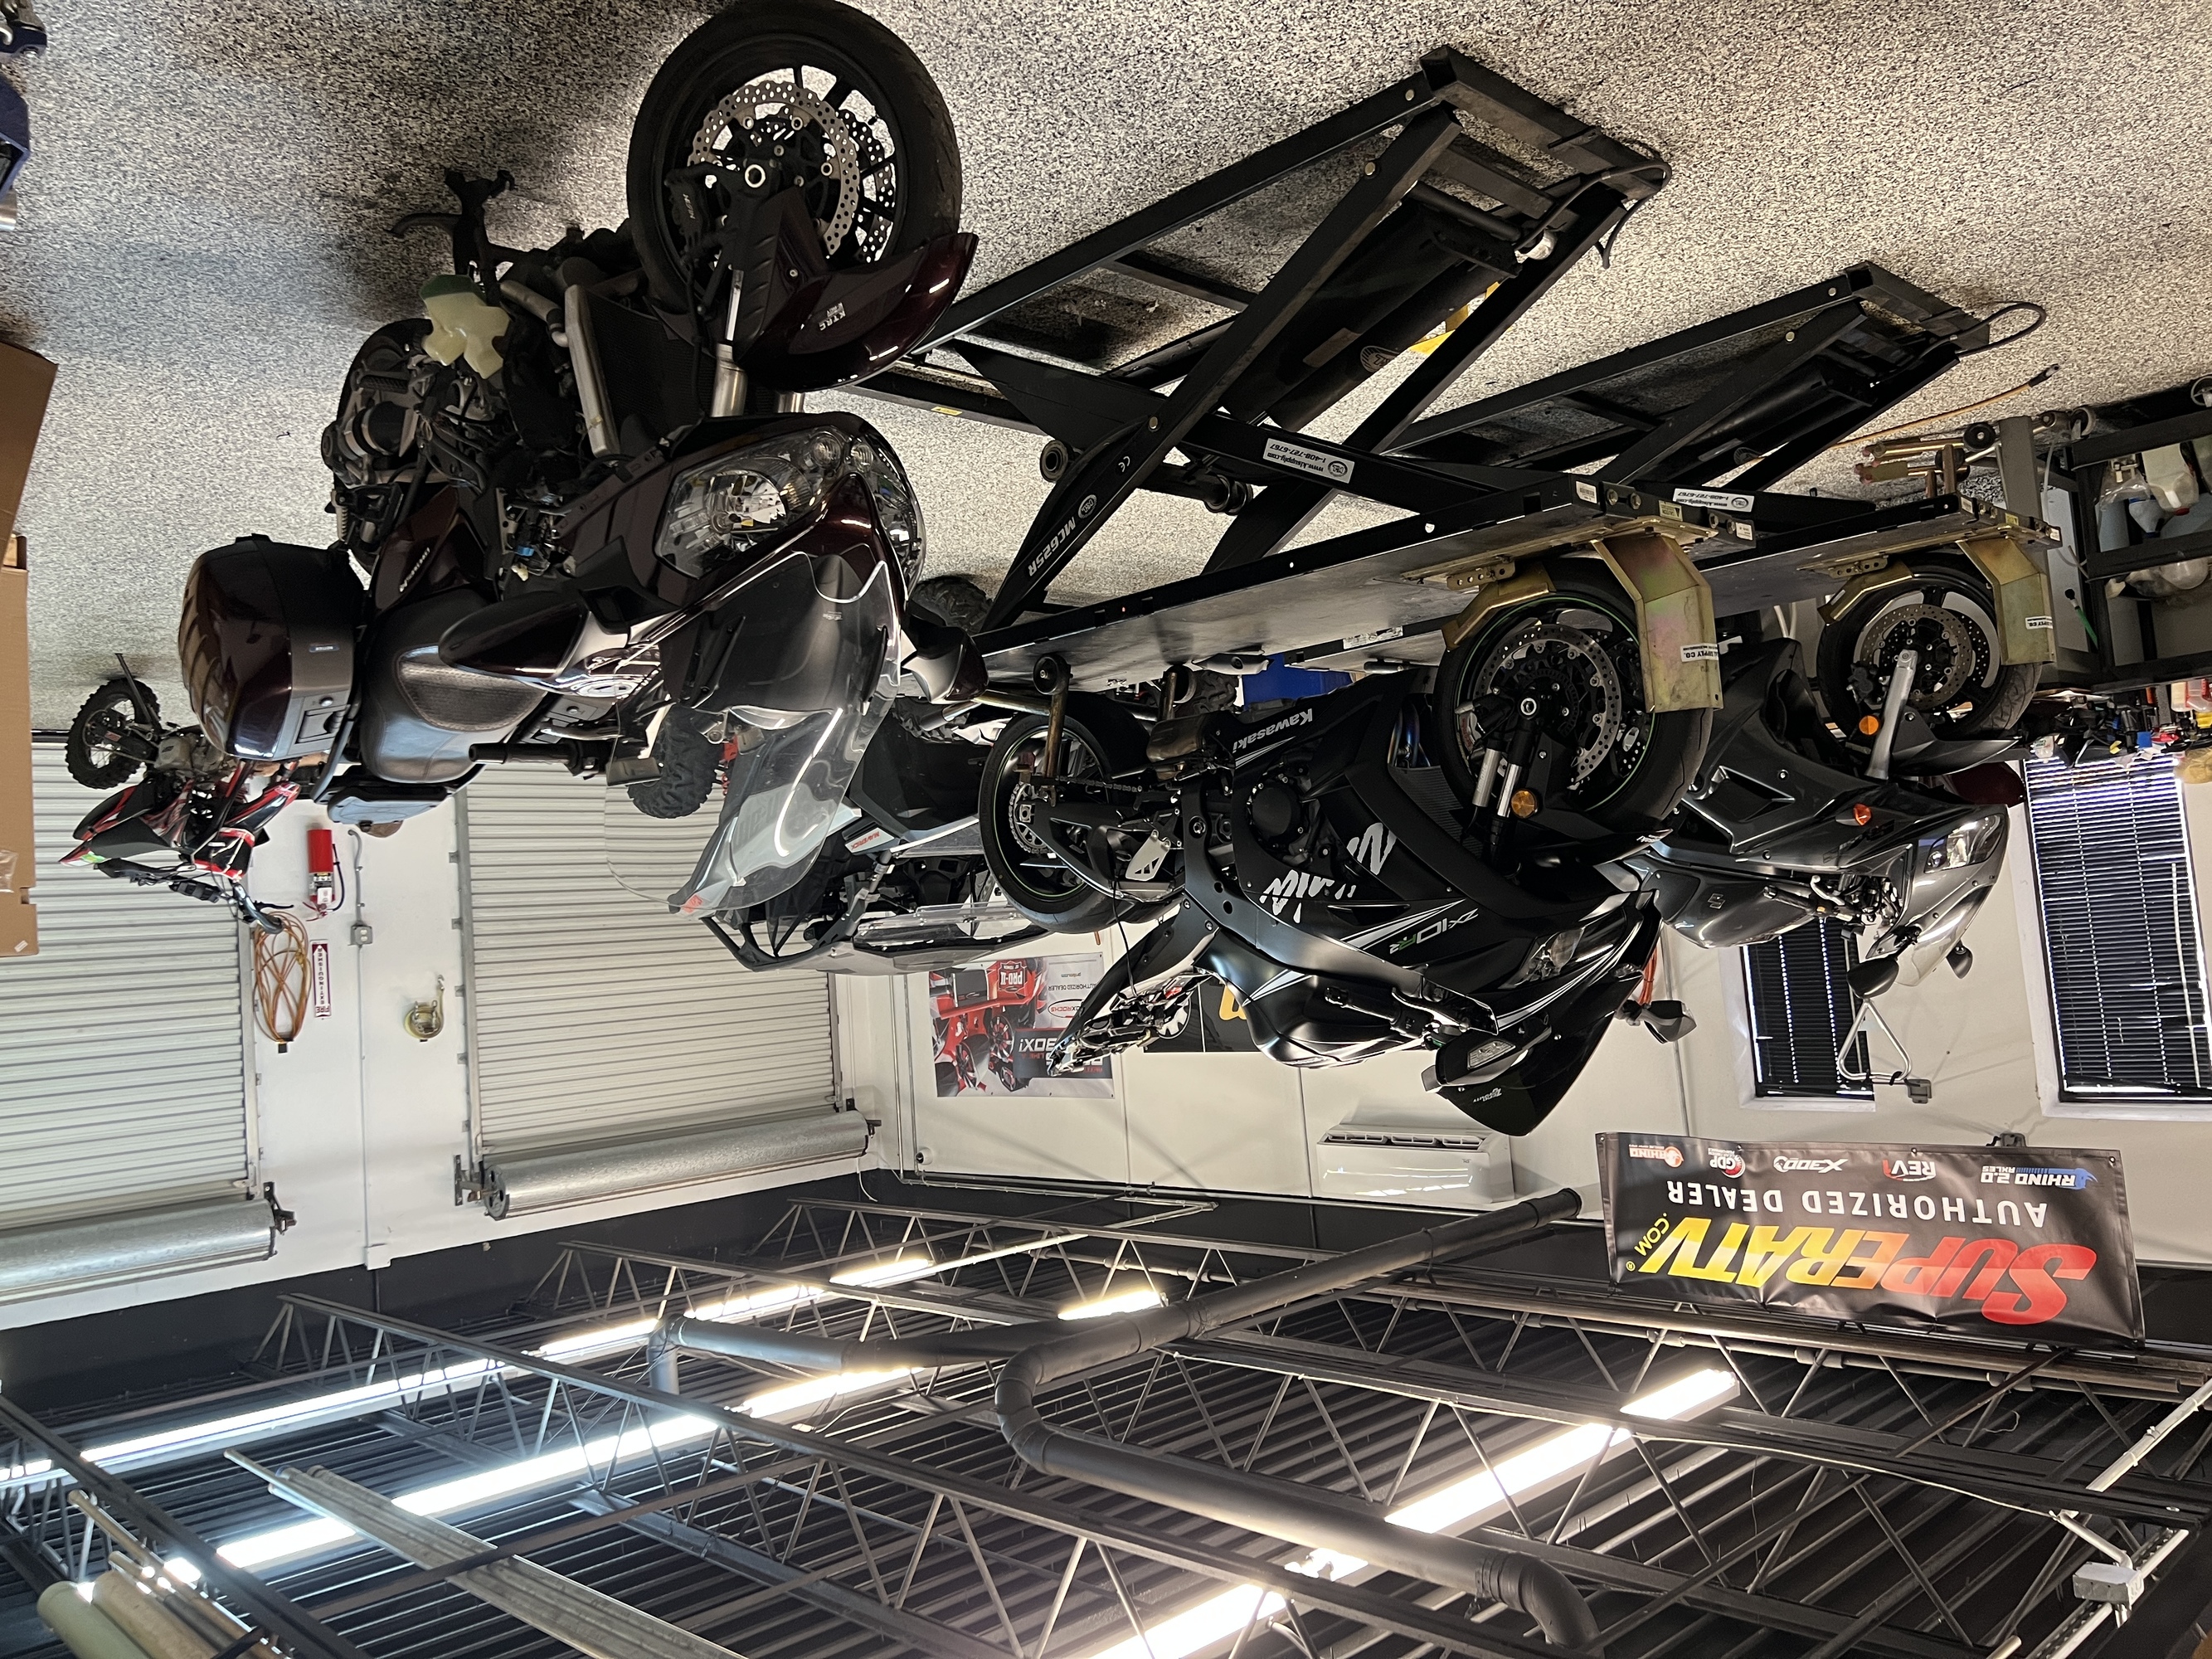 Powersports vehicles parked in the S&N service department shop